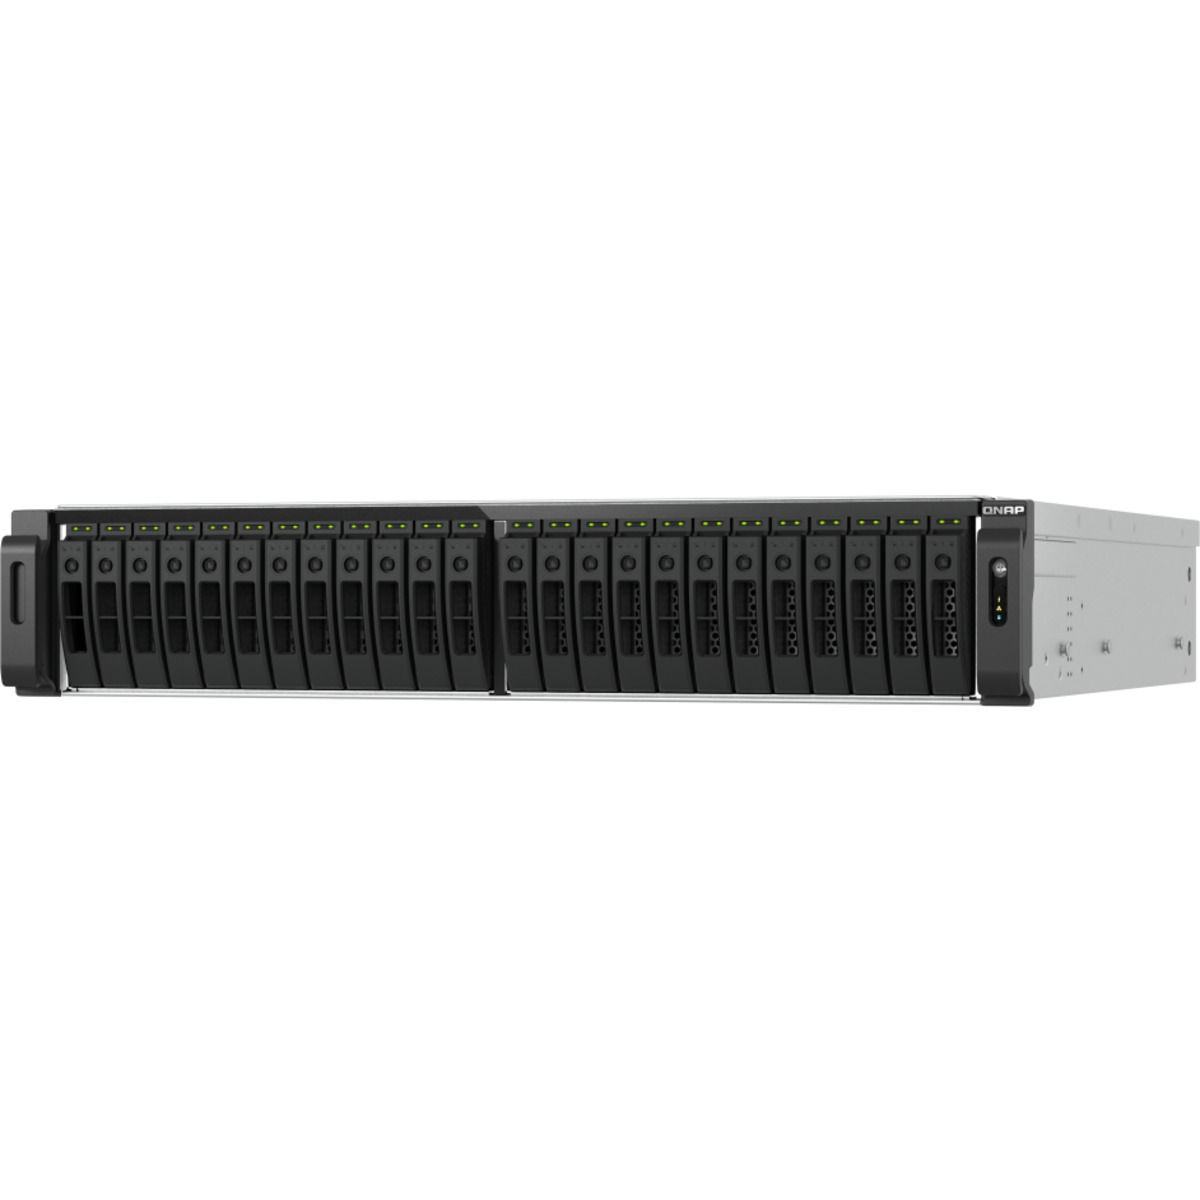 QNAP TS-h3077AFU Ryzen 7 All-Flash ZFS 30tb 30-Bay RackMount Large Business / Enterprise NAS - Network Attached Storage Device 30x1tb Western Digital Red SA500 WDS100T1R0A 2.5 560/530MB/s SATA 6Gb/s SSD NAS Class Drives Installed - Burn-In Tested TS-h3077AFU Ryzen 7 All-Flash ZFS